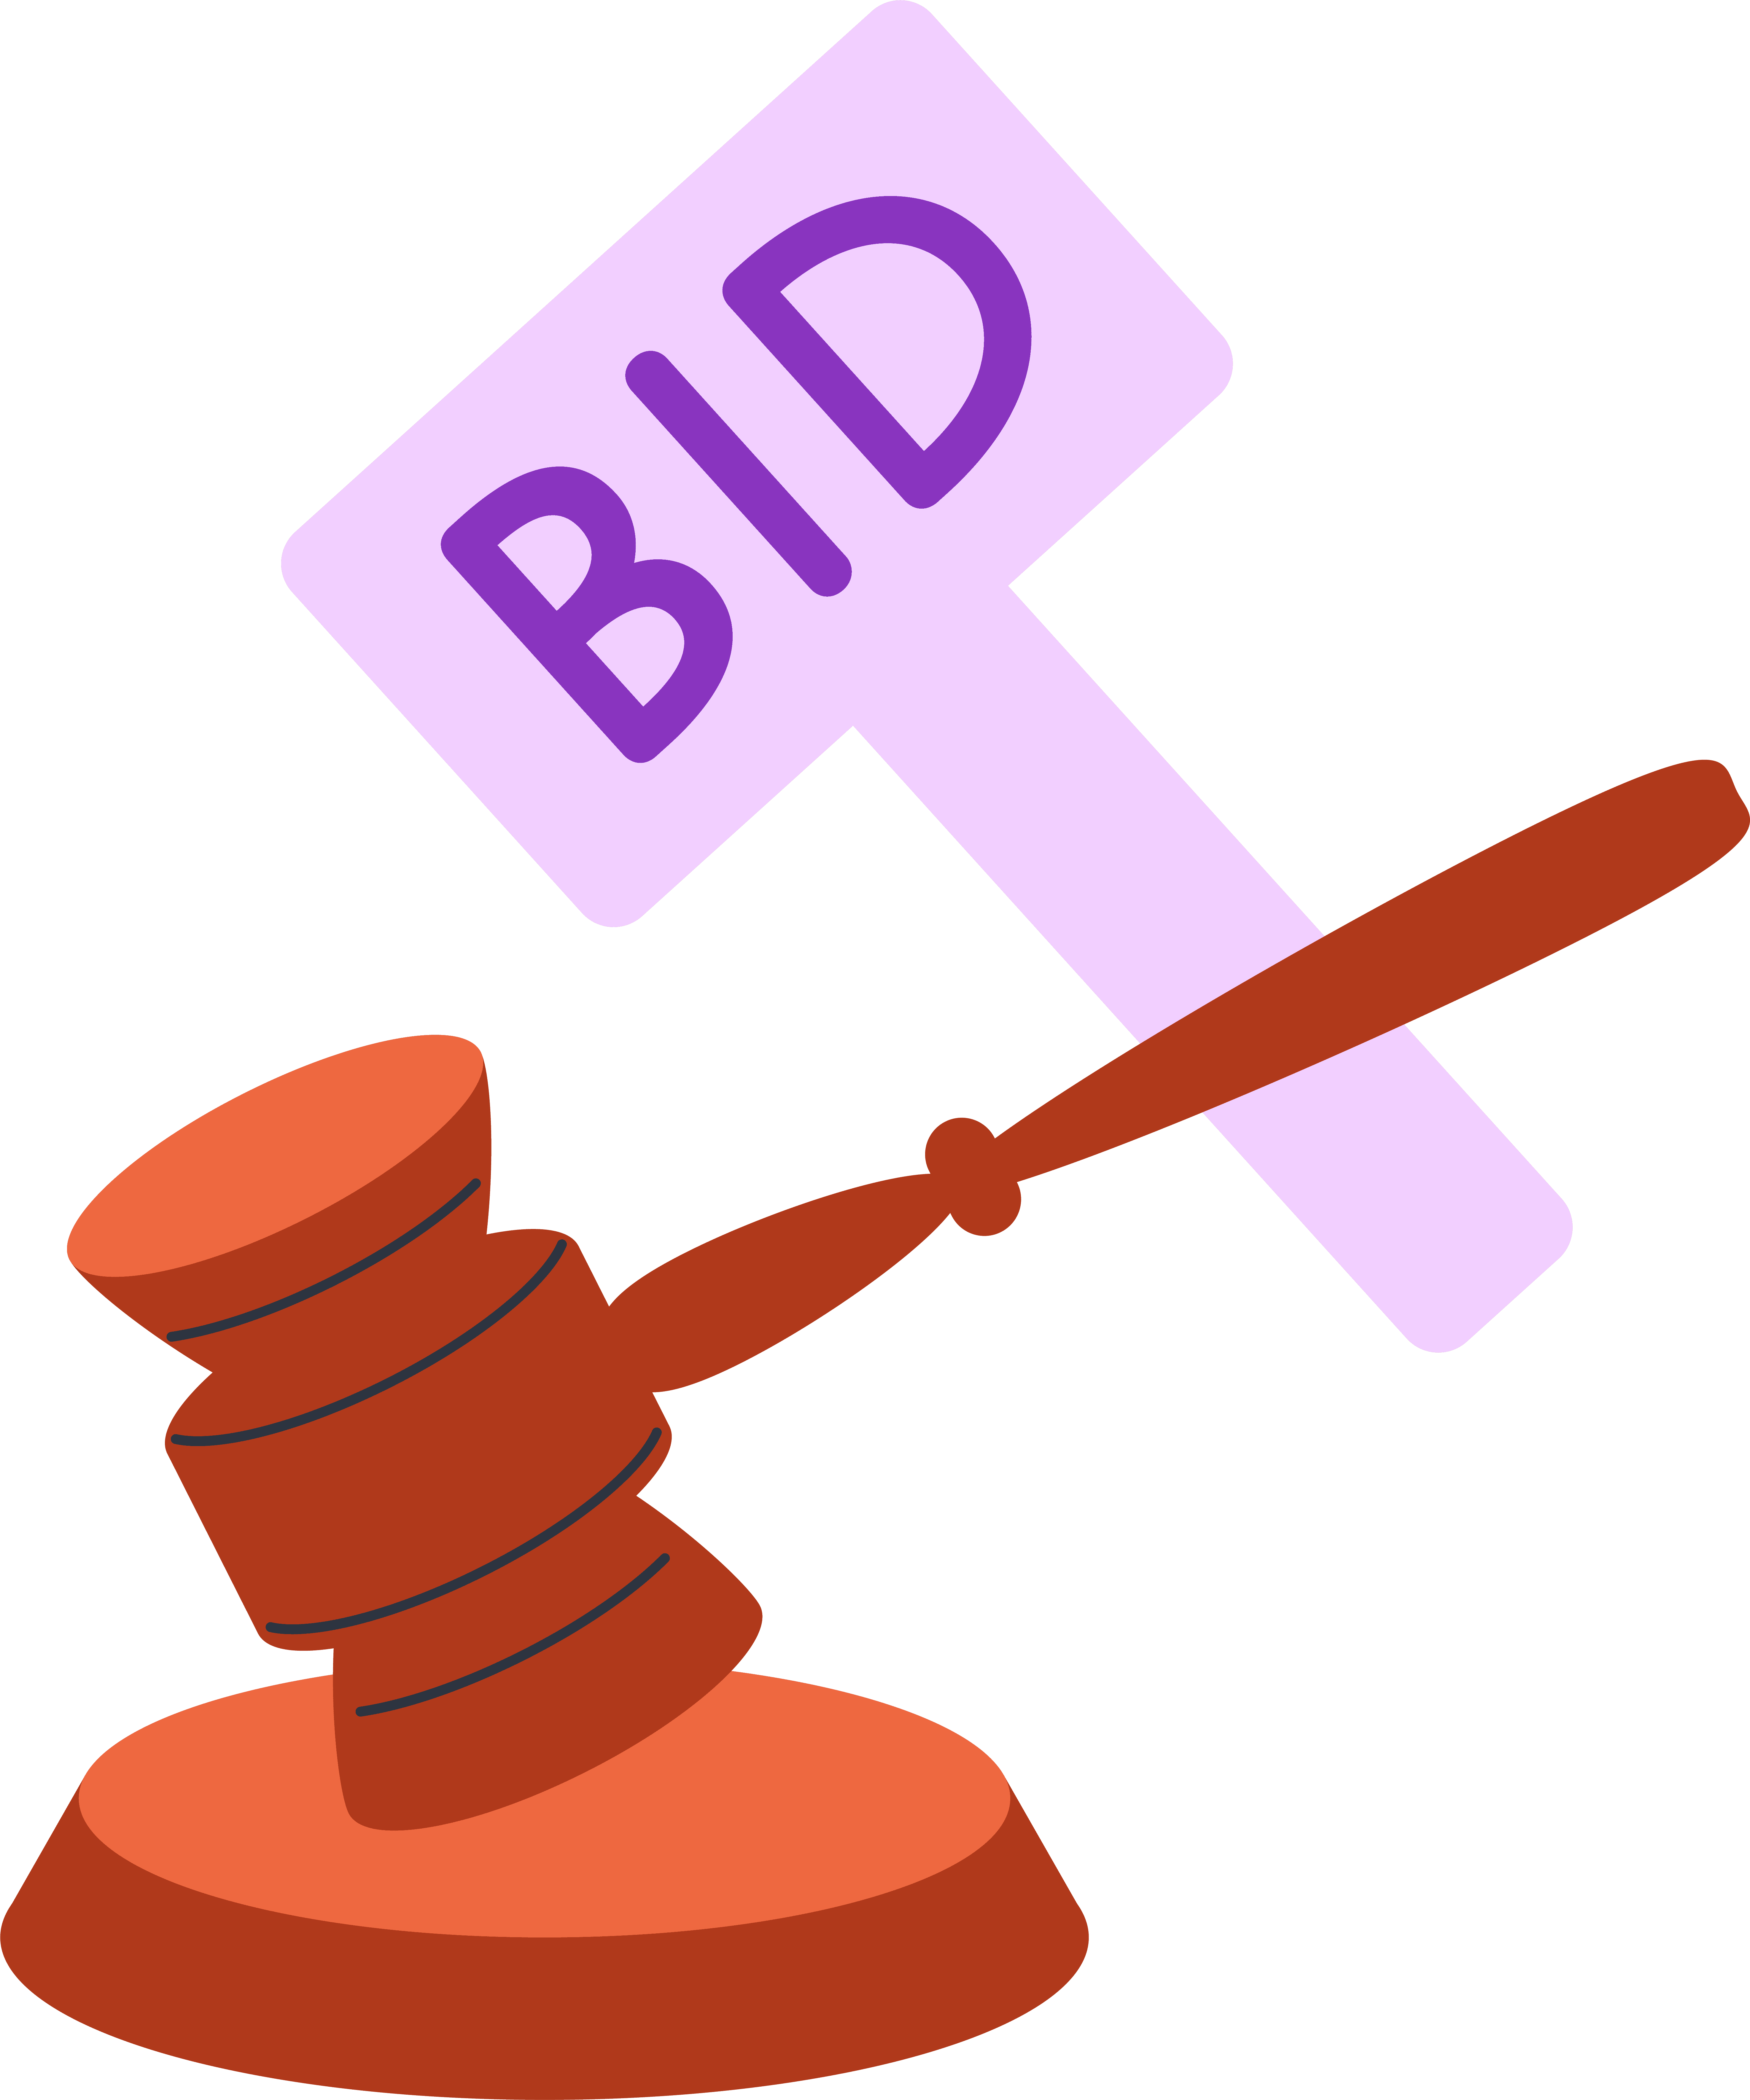 Set bid increment for online charity auction